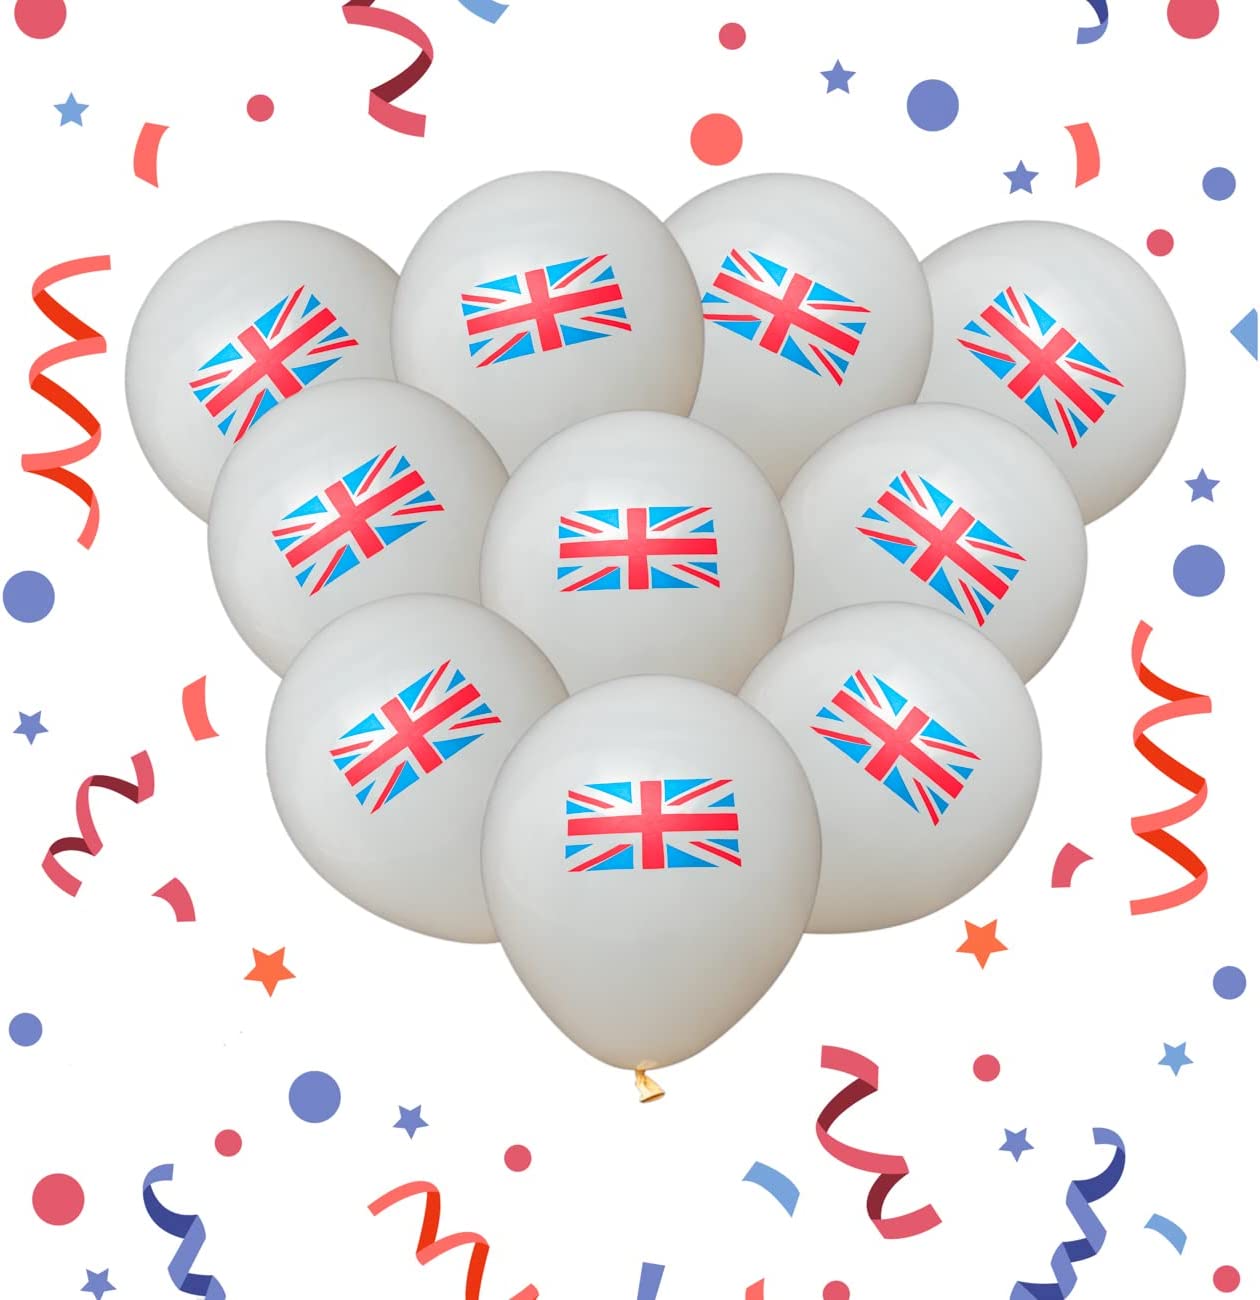 100 pcs 12" Union Jack Flag Printed Balloons Country Party street Decorations